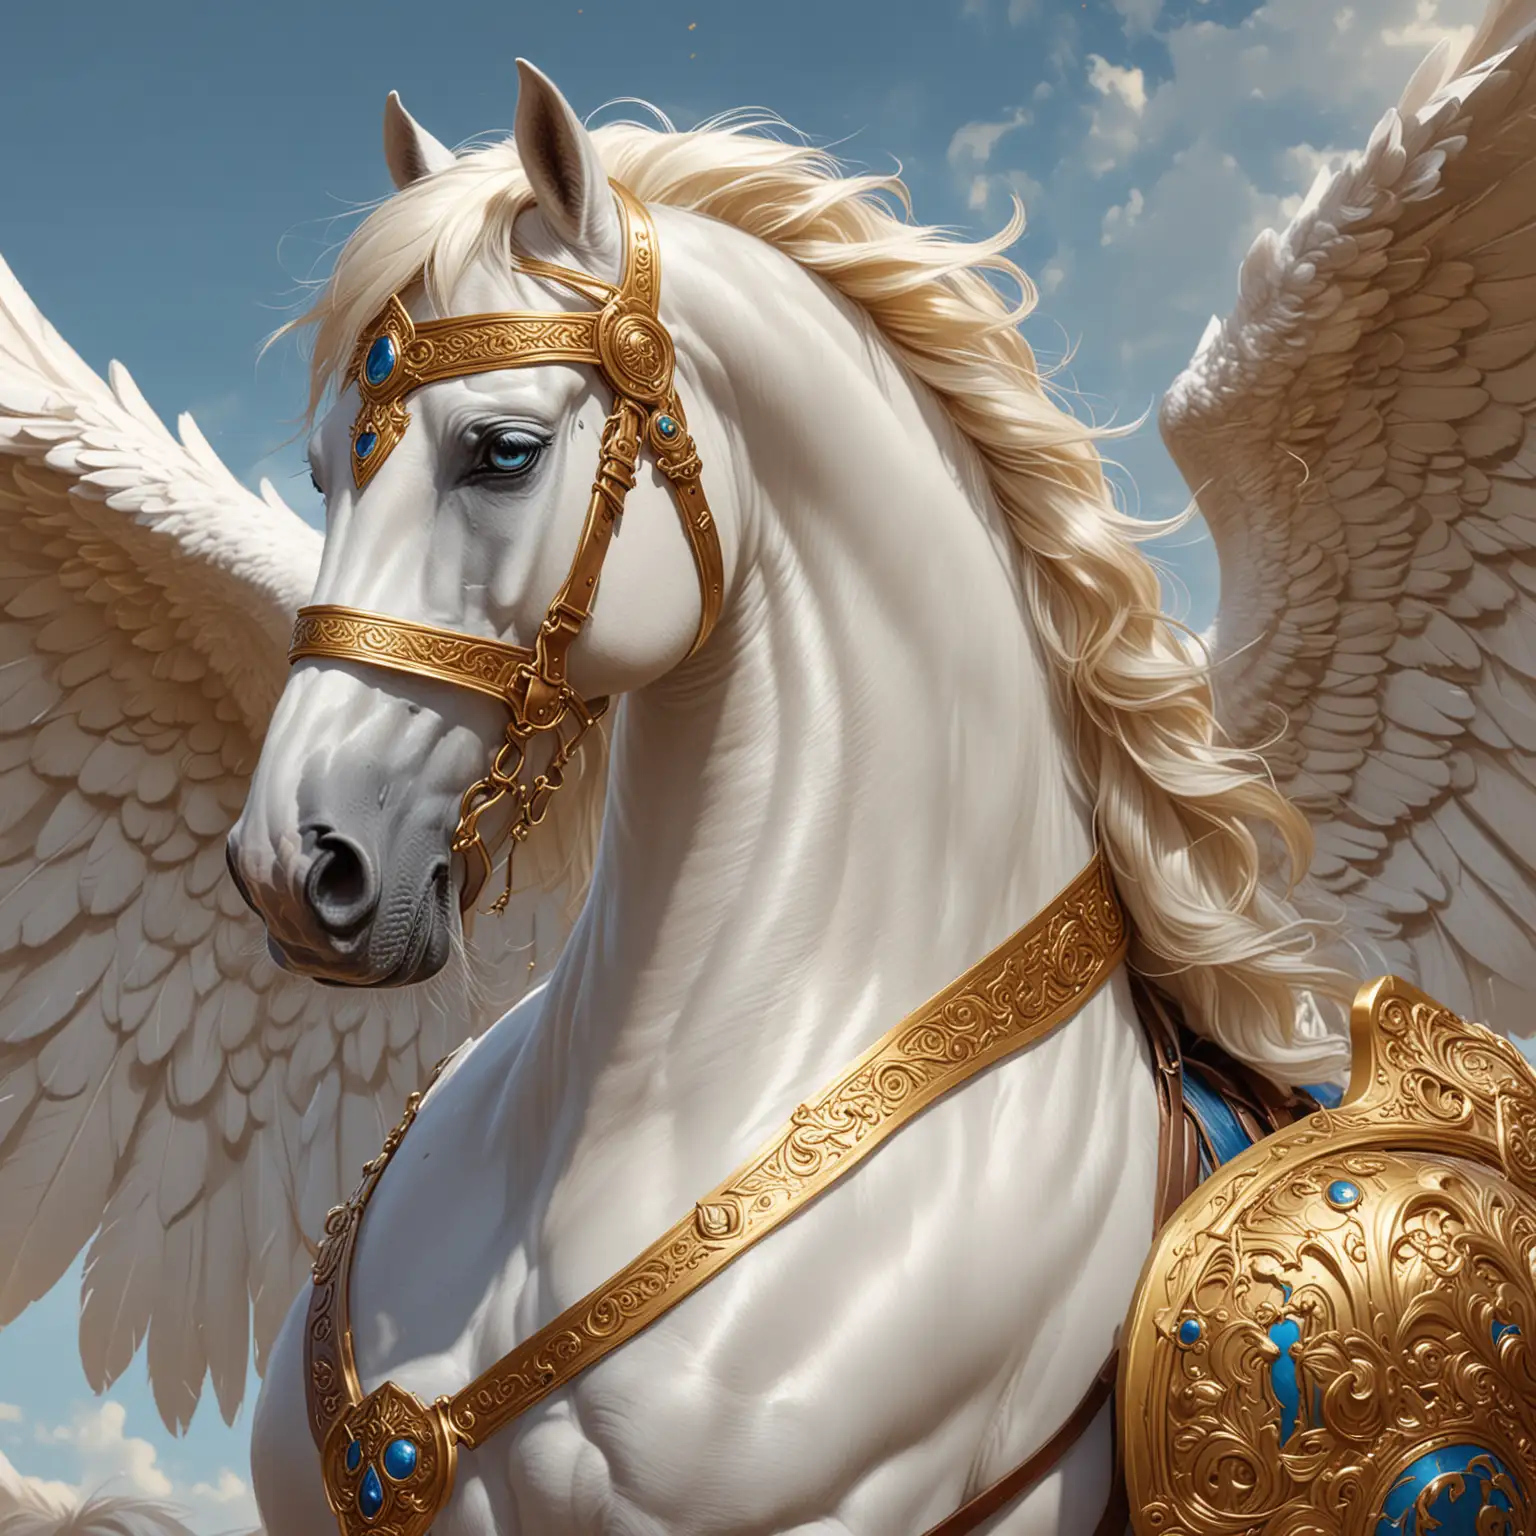 Majestic White Horse with Gold and Steel Barding Detailed Fantasy Digital Painting